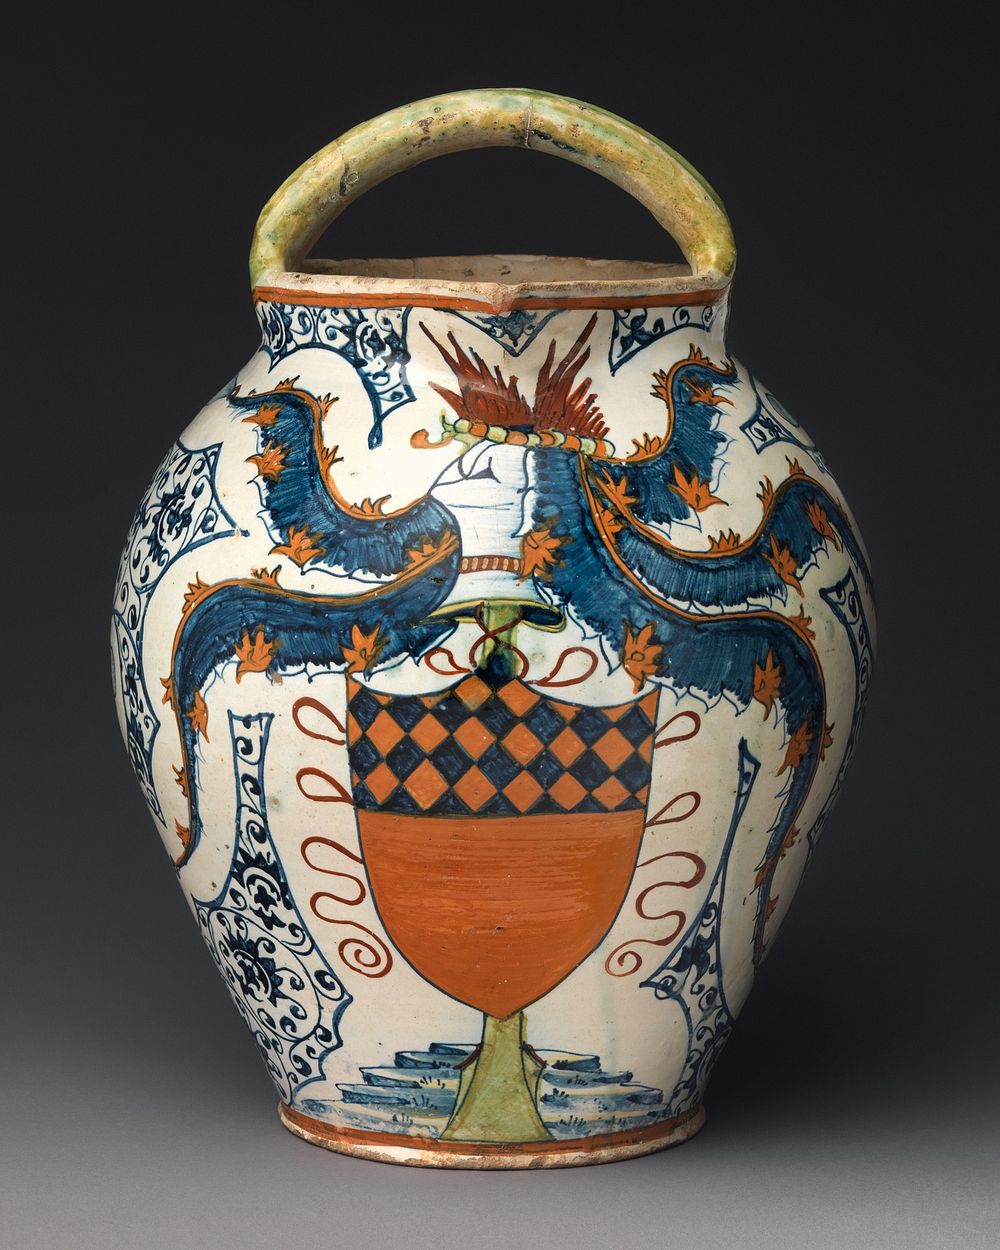 Double-spouted pitcher with arms of the Antinori family